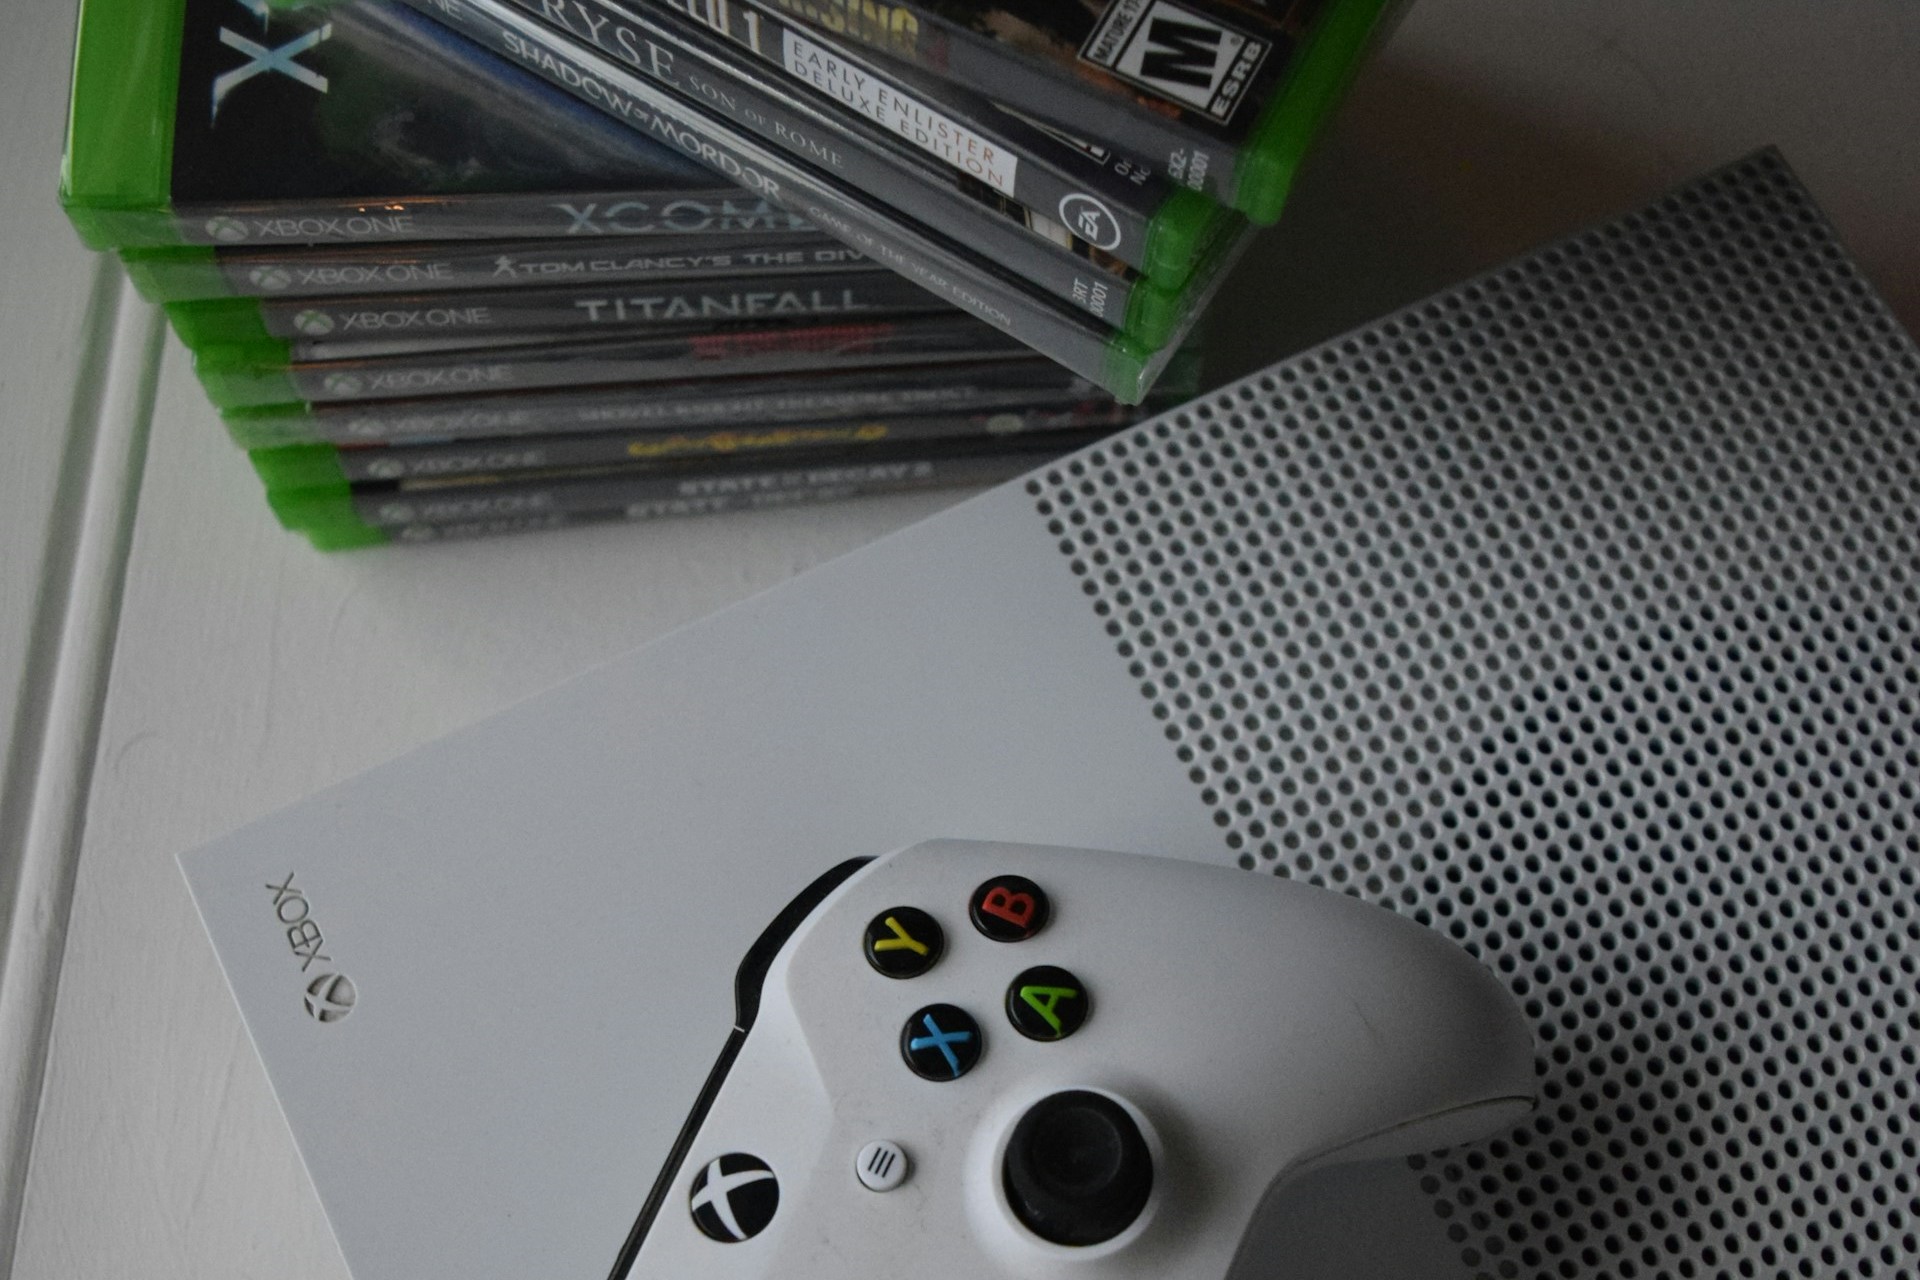 Xbox physcial discs not going anywhere